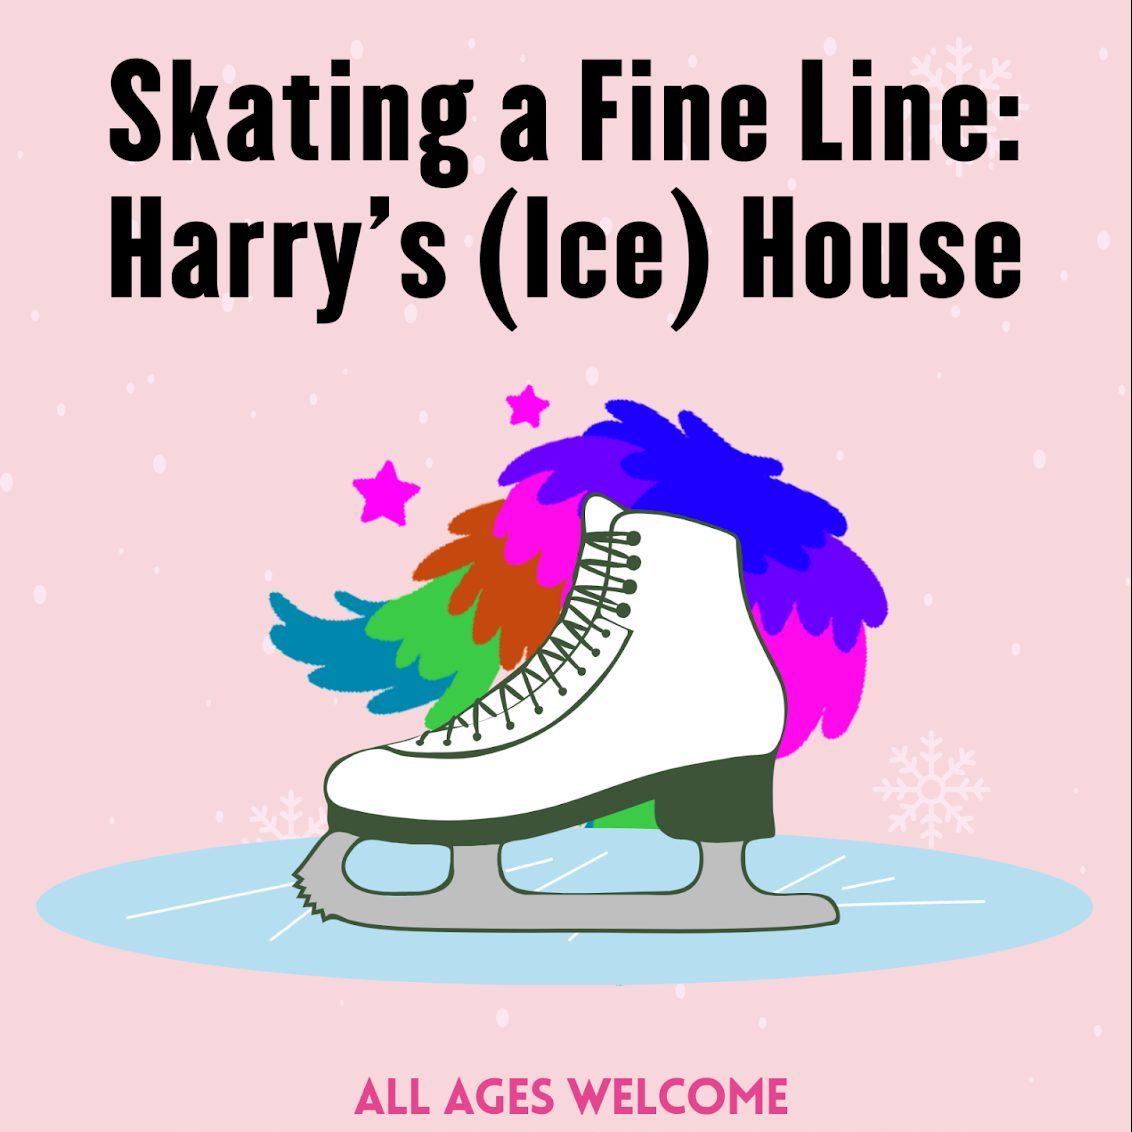 Skating a Fine Line: Harry’s (Ice) House